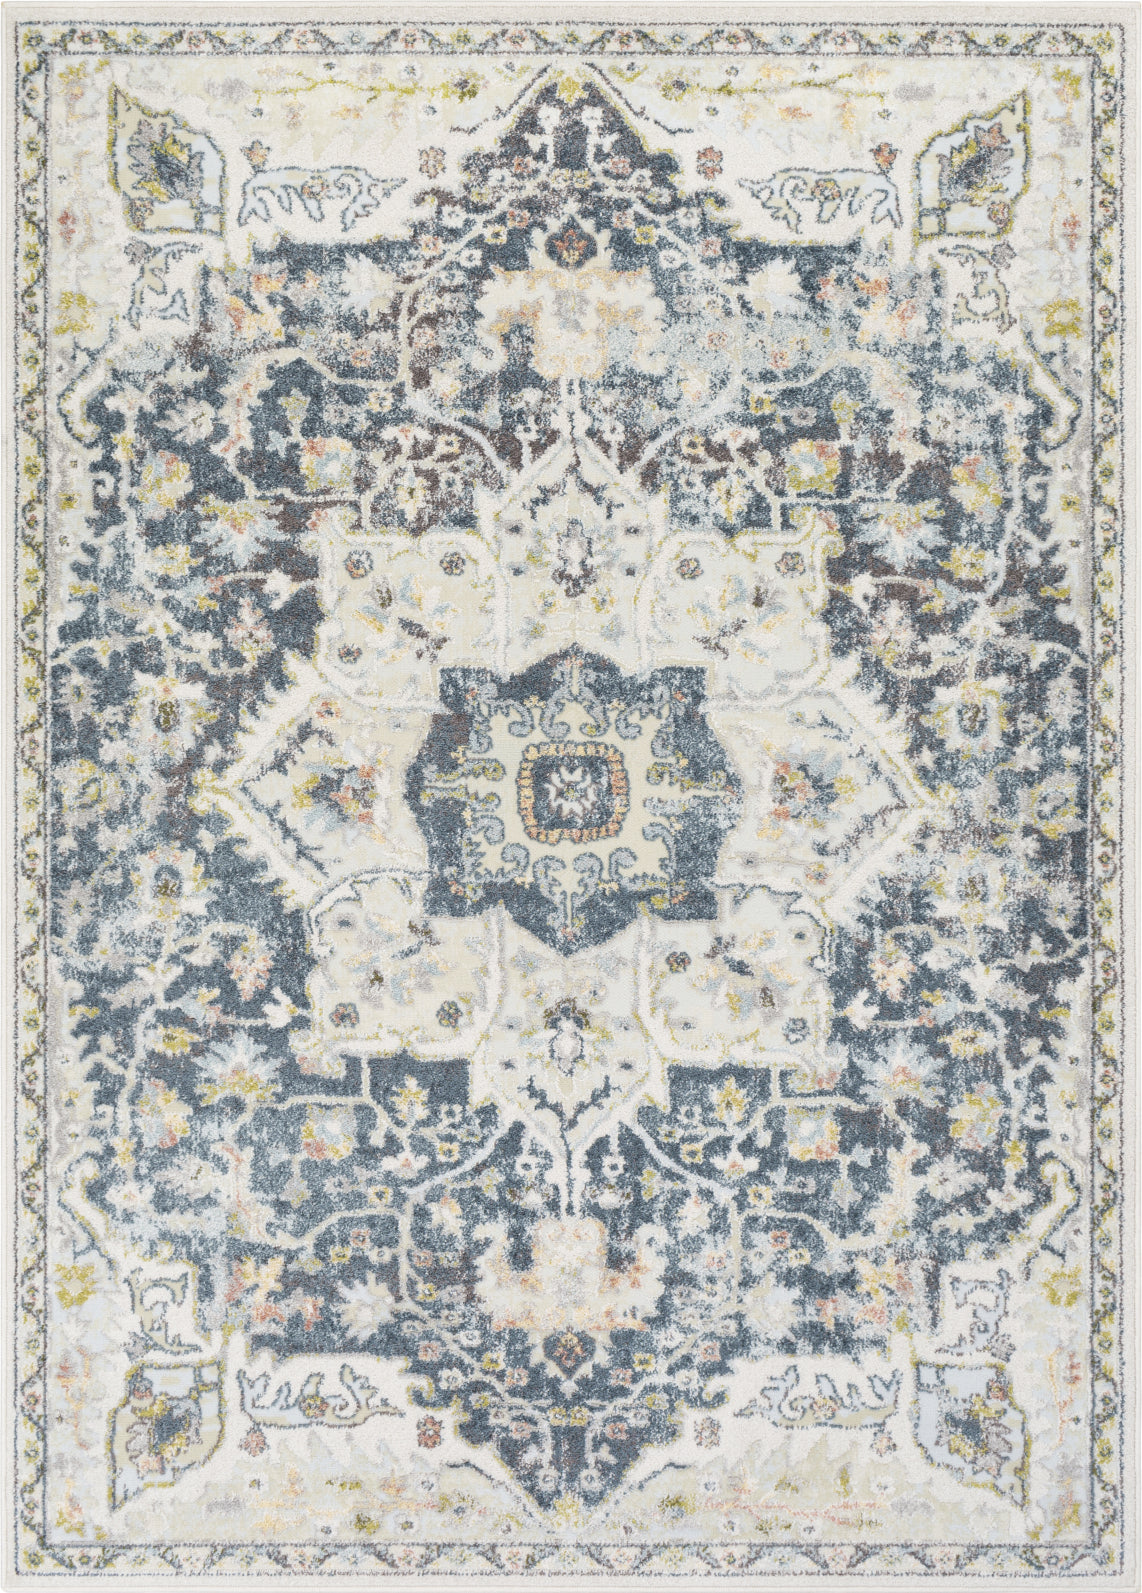 Surya New Mexico NWM-2319 Area Rug by Artistic Weavers